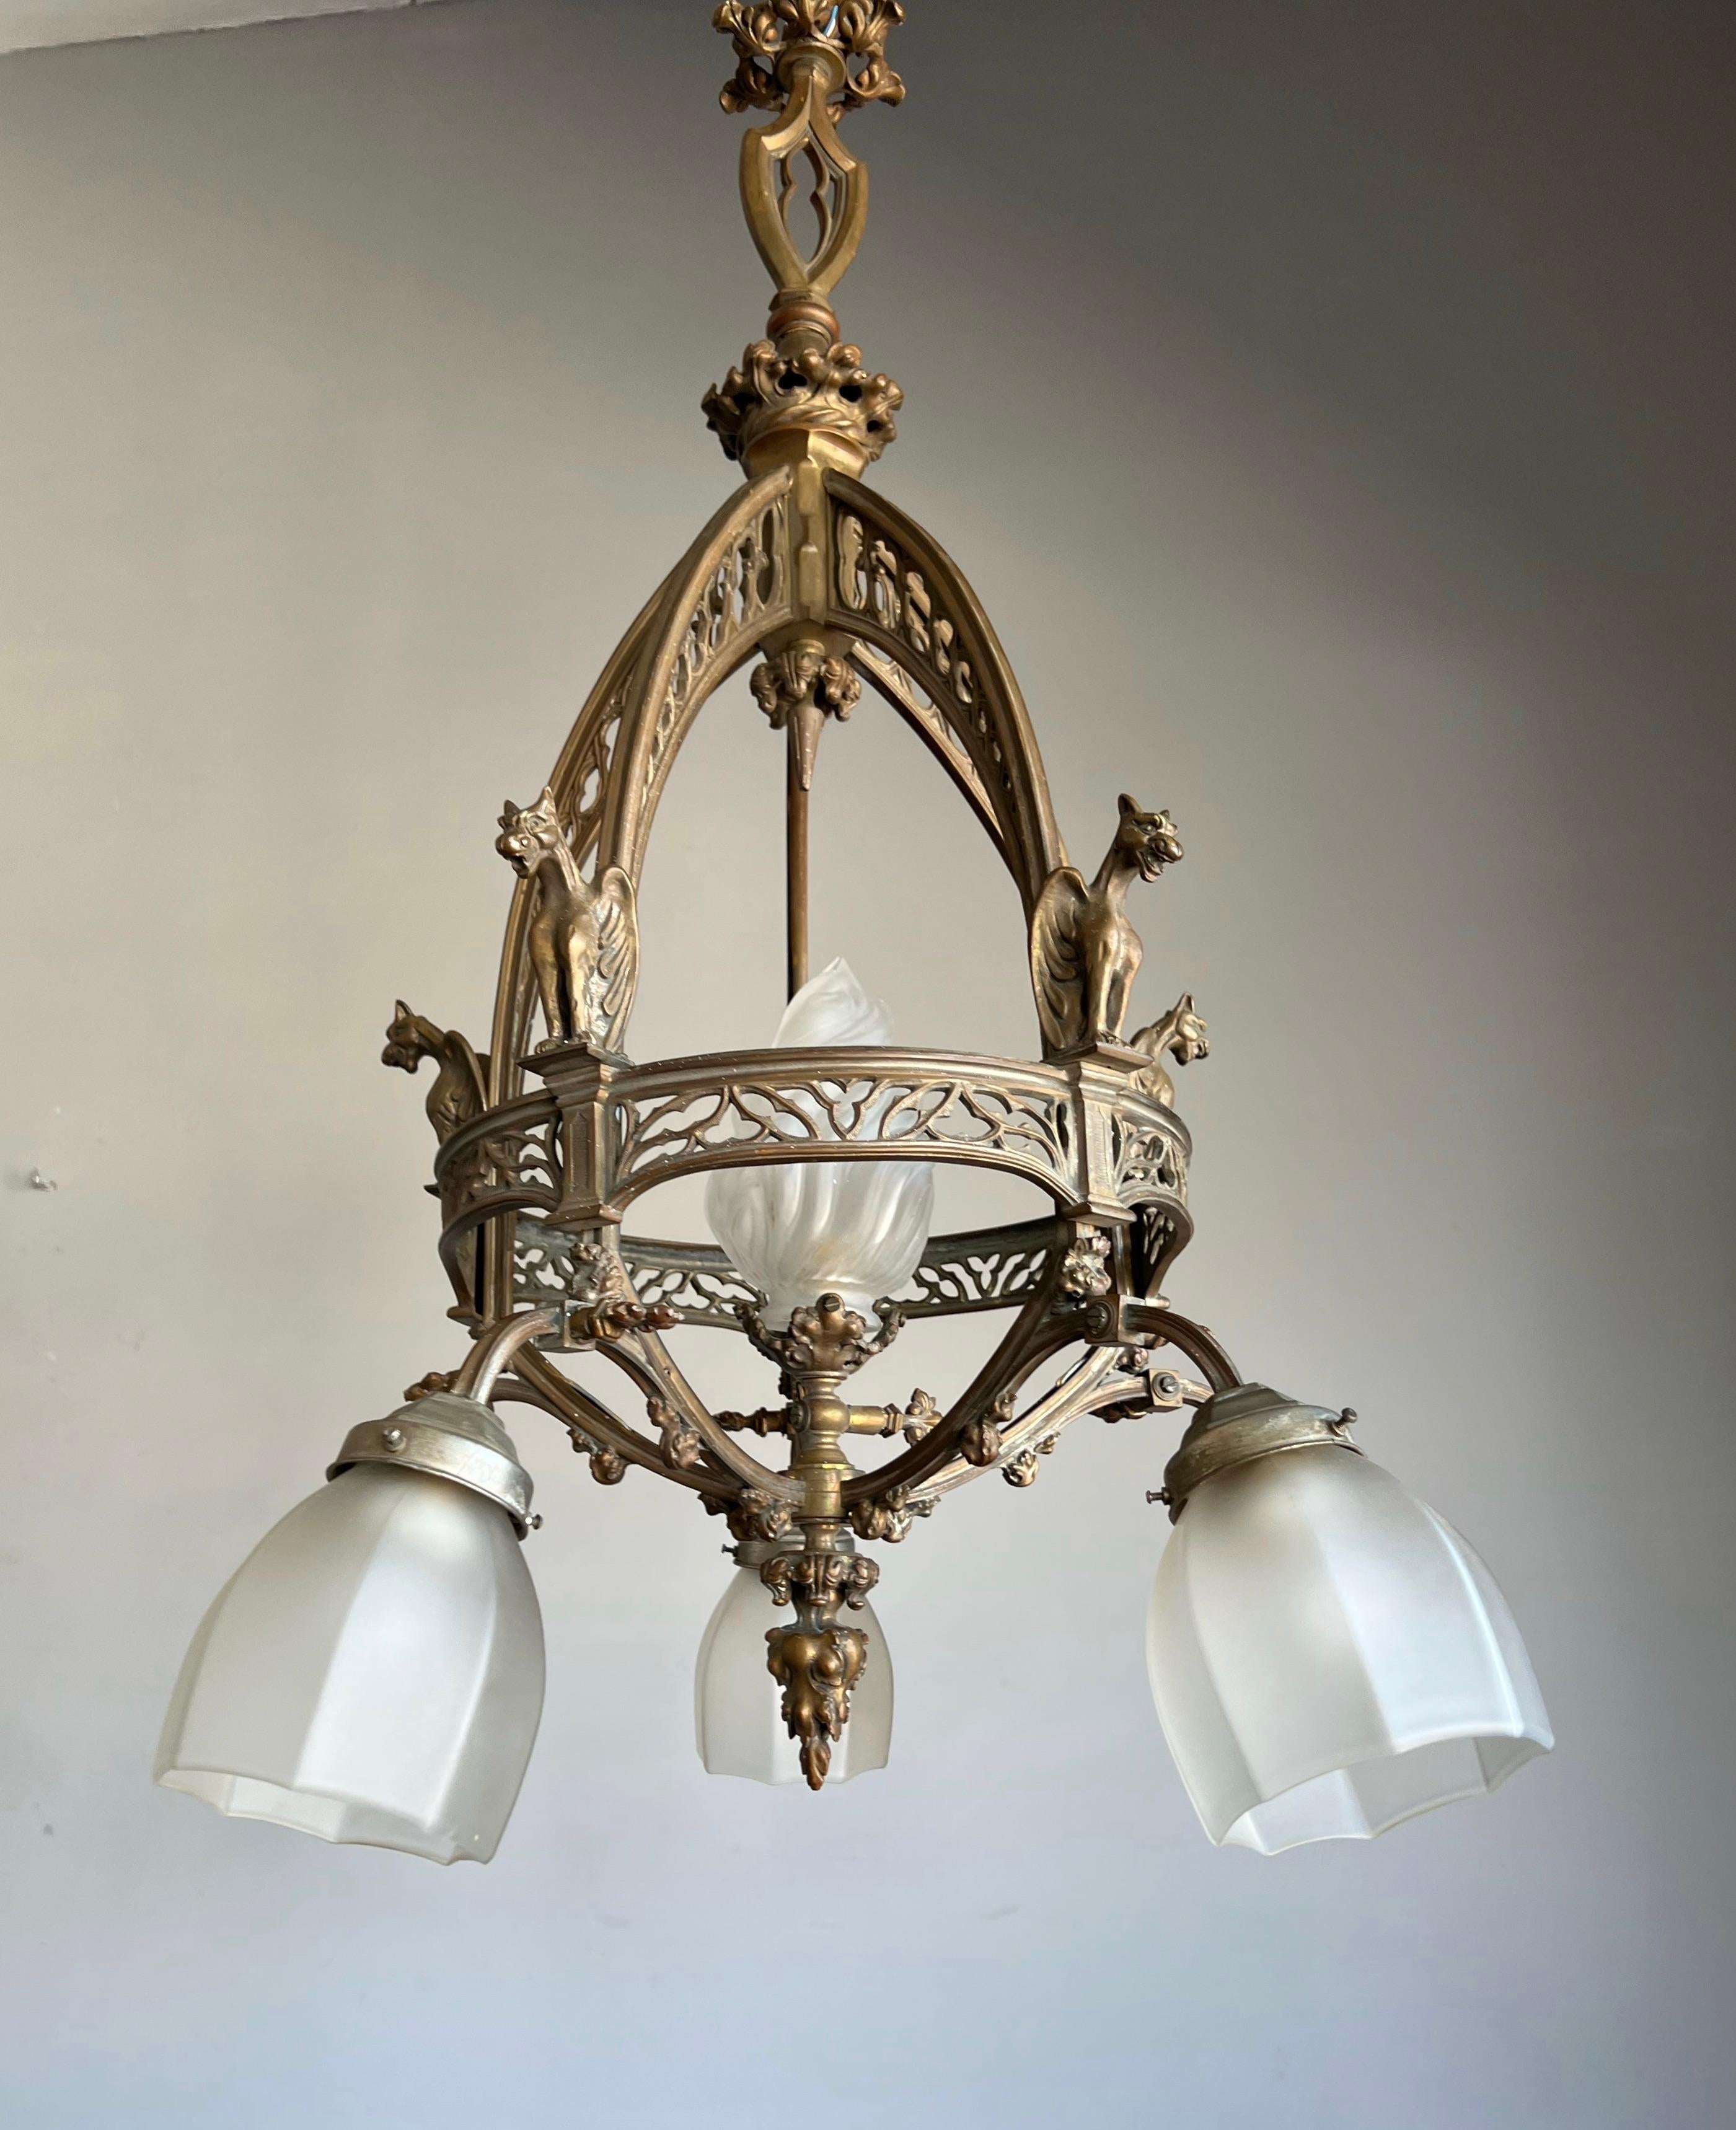 French Architectural Design Bronze Gothic Revival Winged Gargoyle Sculptures Chandelier For Sale